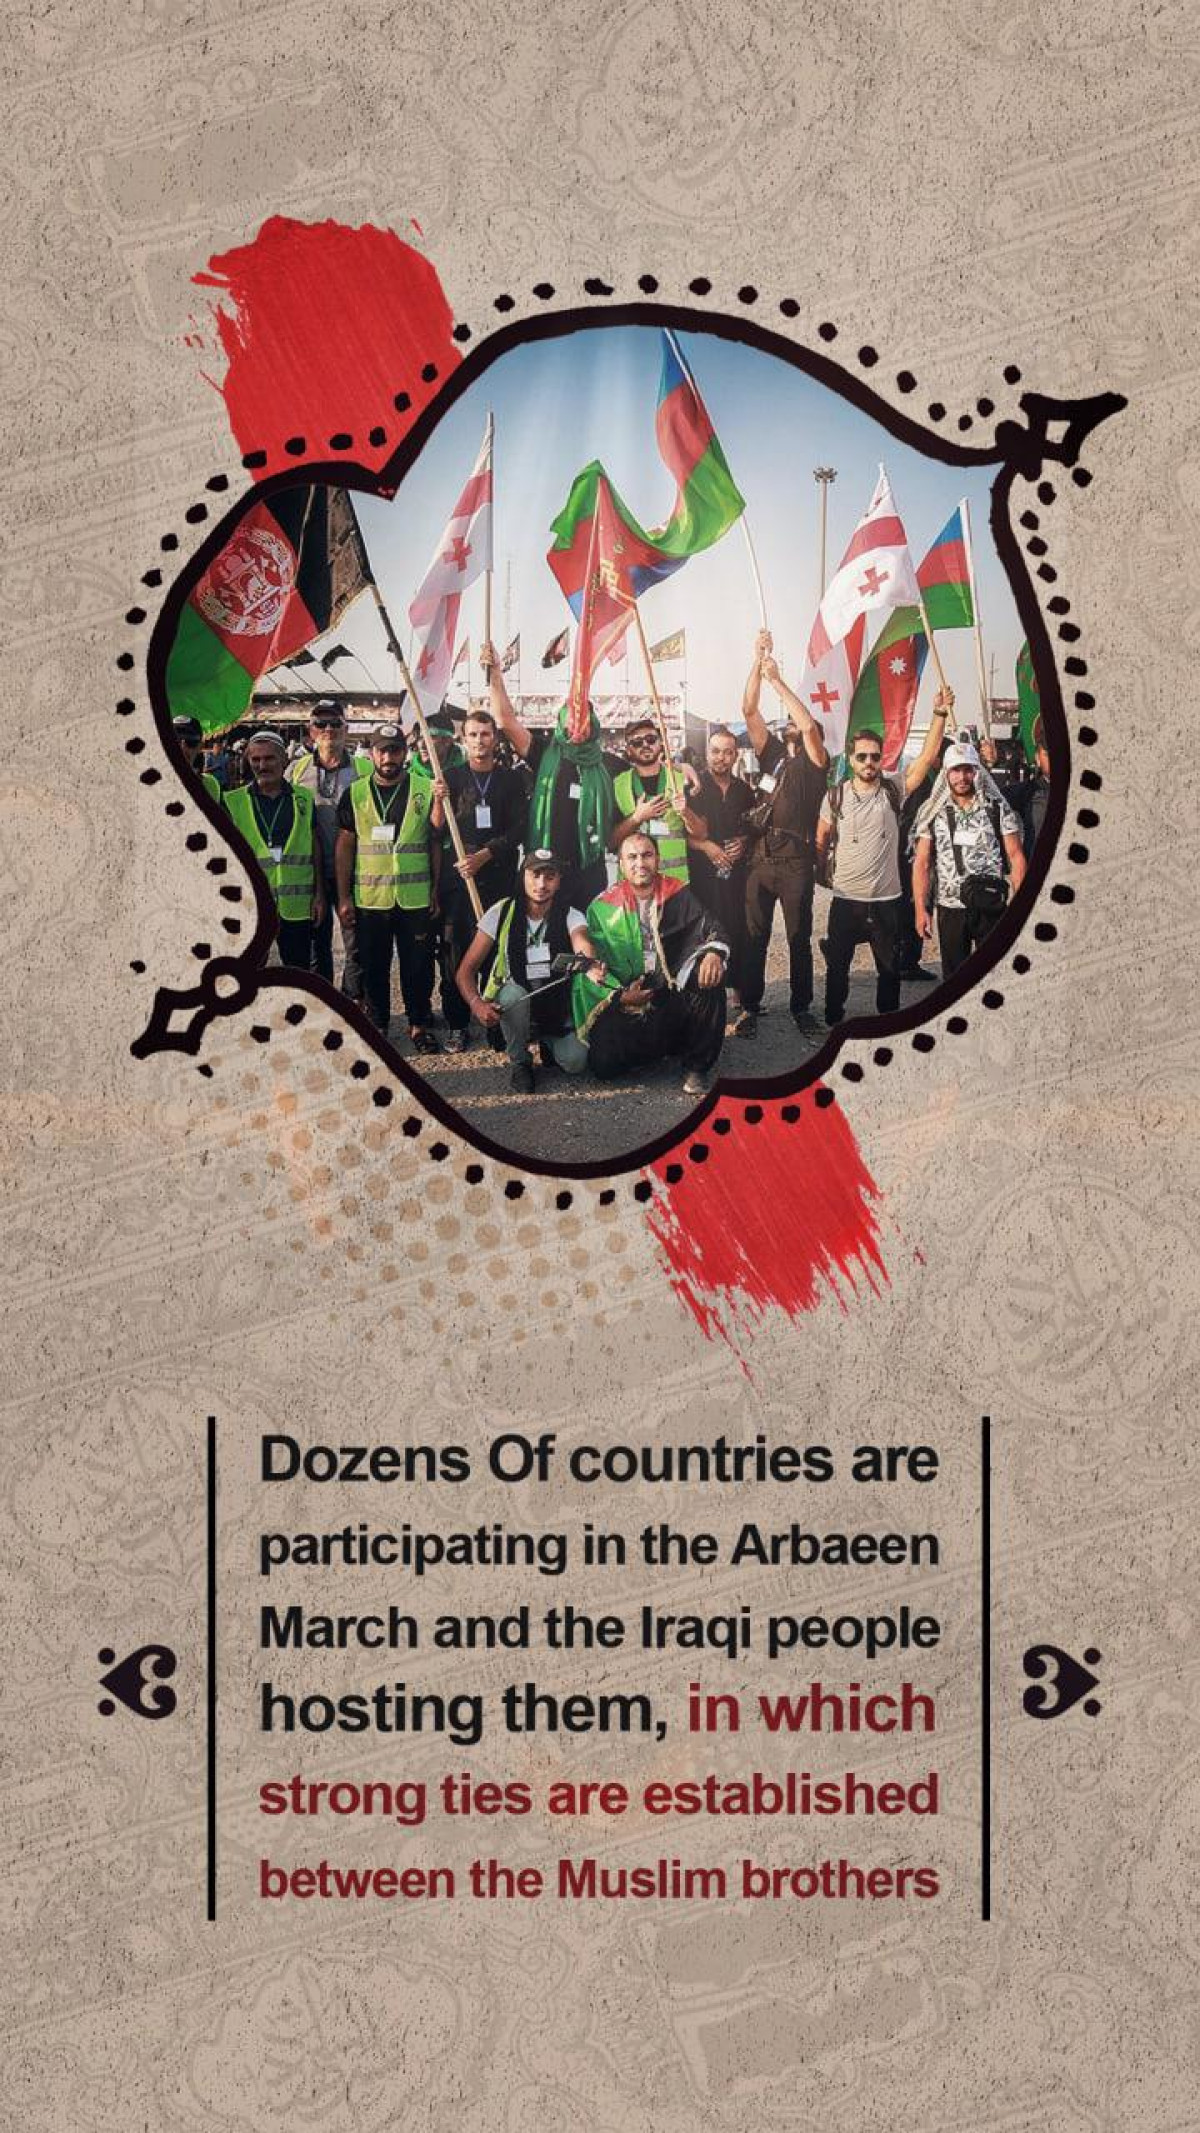 Dozens Of countries are participating in the Arbaeen March